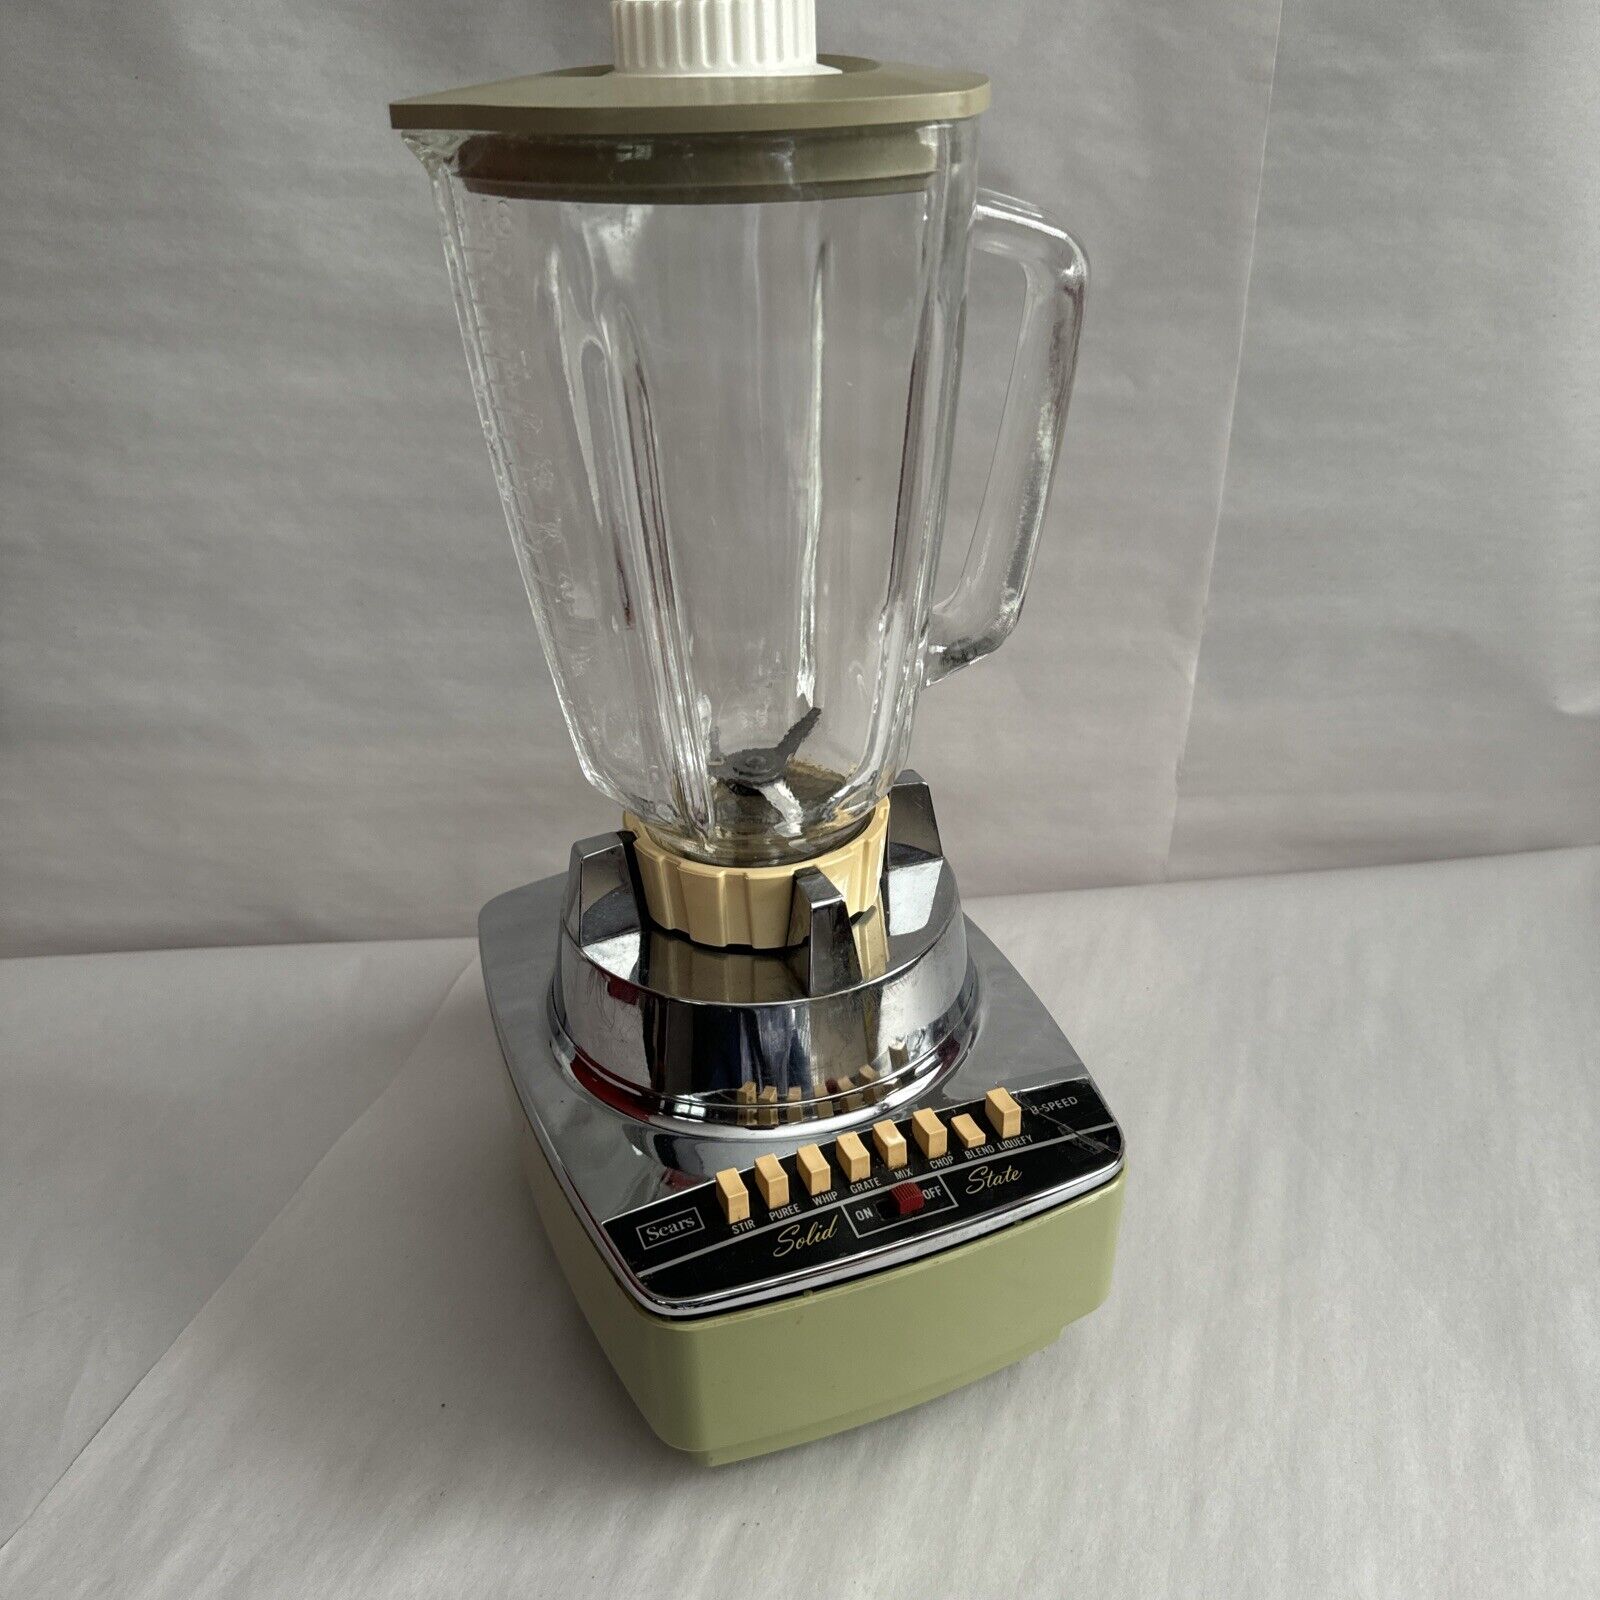 Vintage Sears 8 Speed Avocado Green 1970s 70s MCM Kitchen Blender Tested